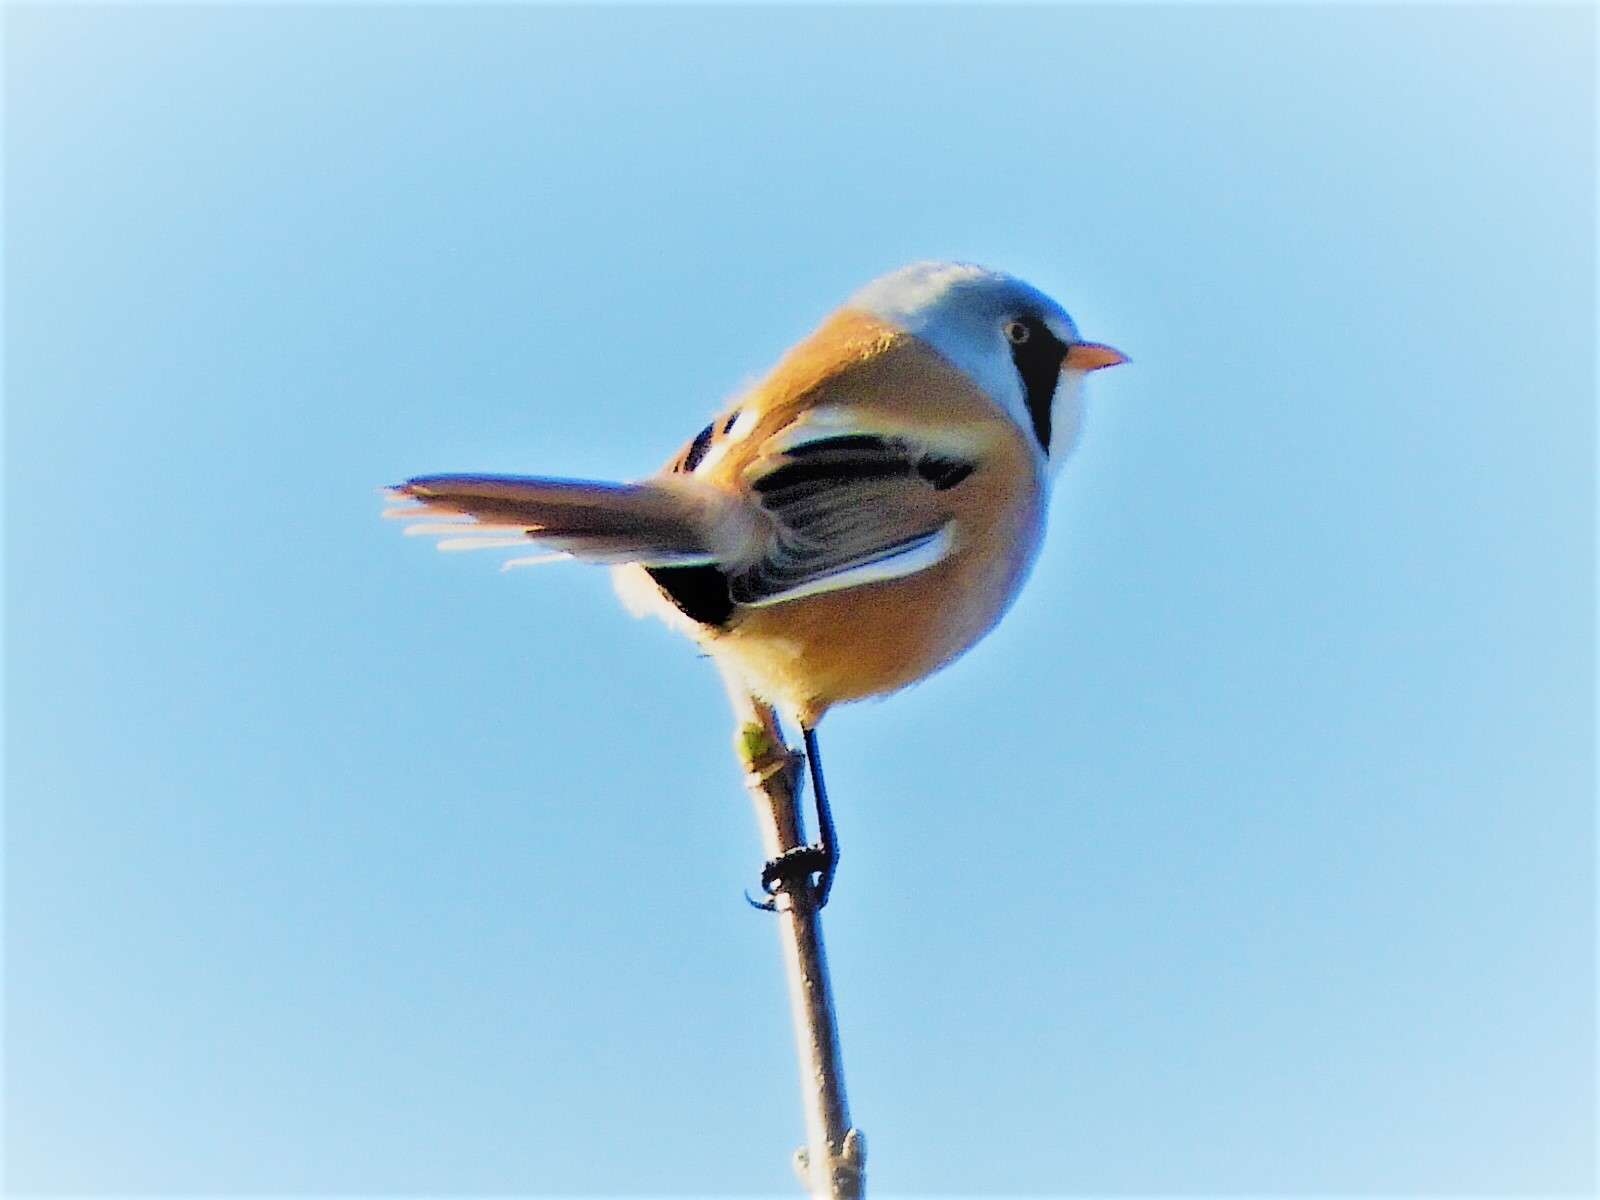 Bearded Tit by Keith Cutting at Berry Head